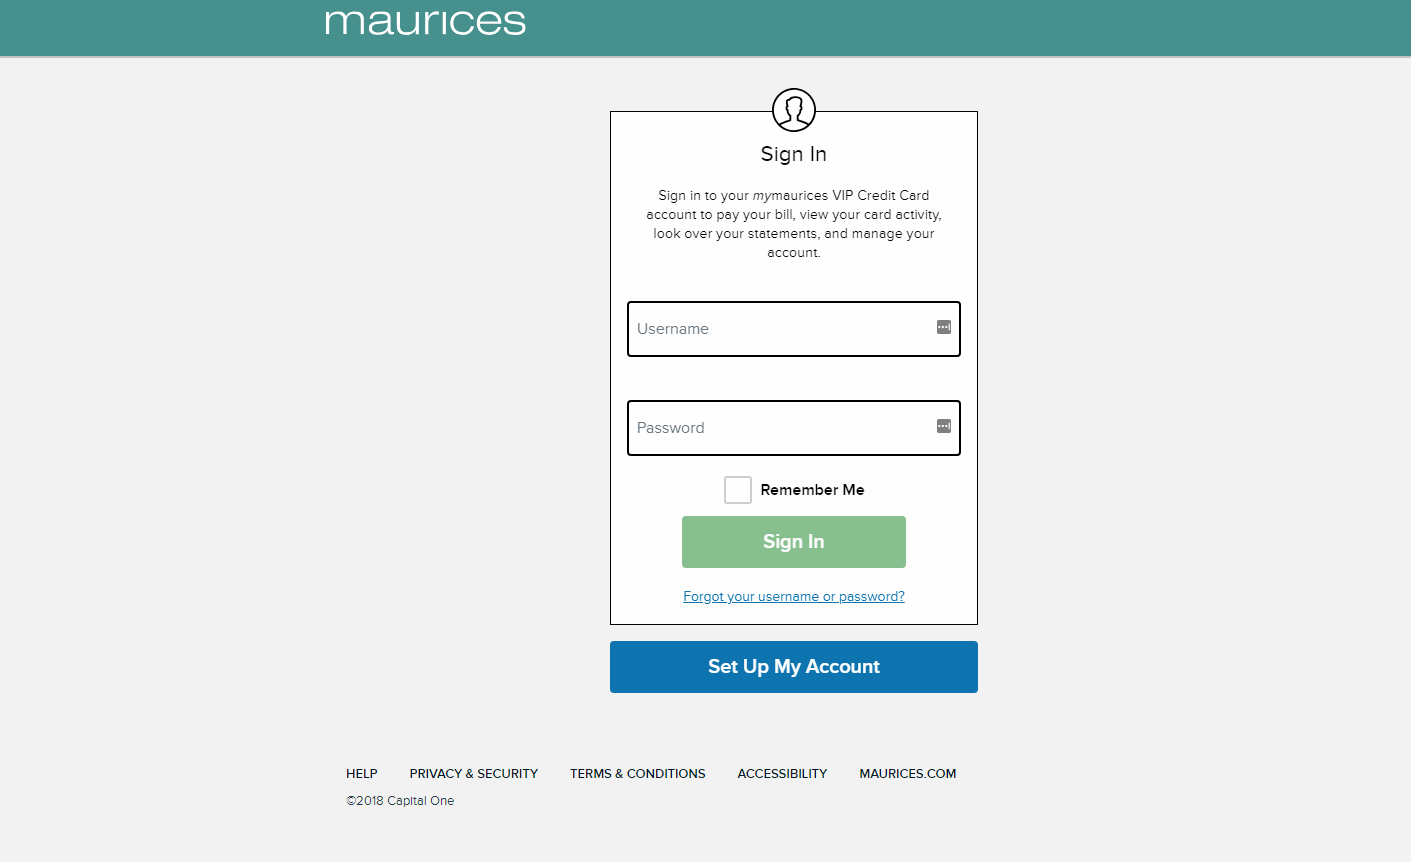 https://d.comenity.net/maurices/ - Maurices Credit Card Login.